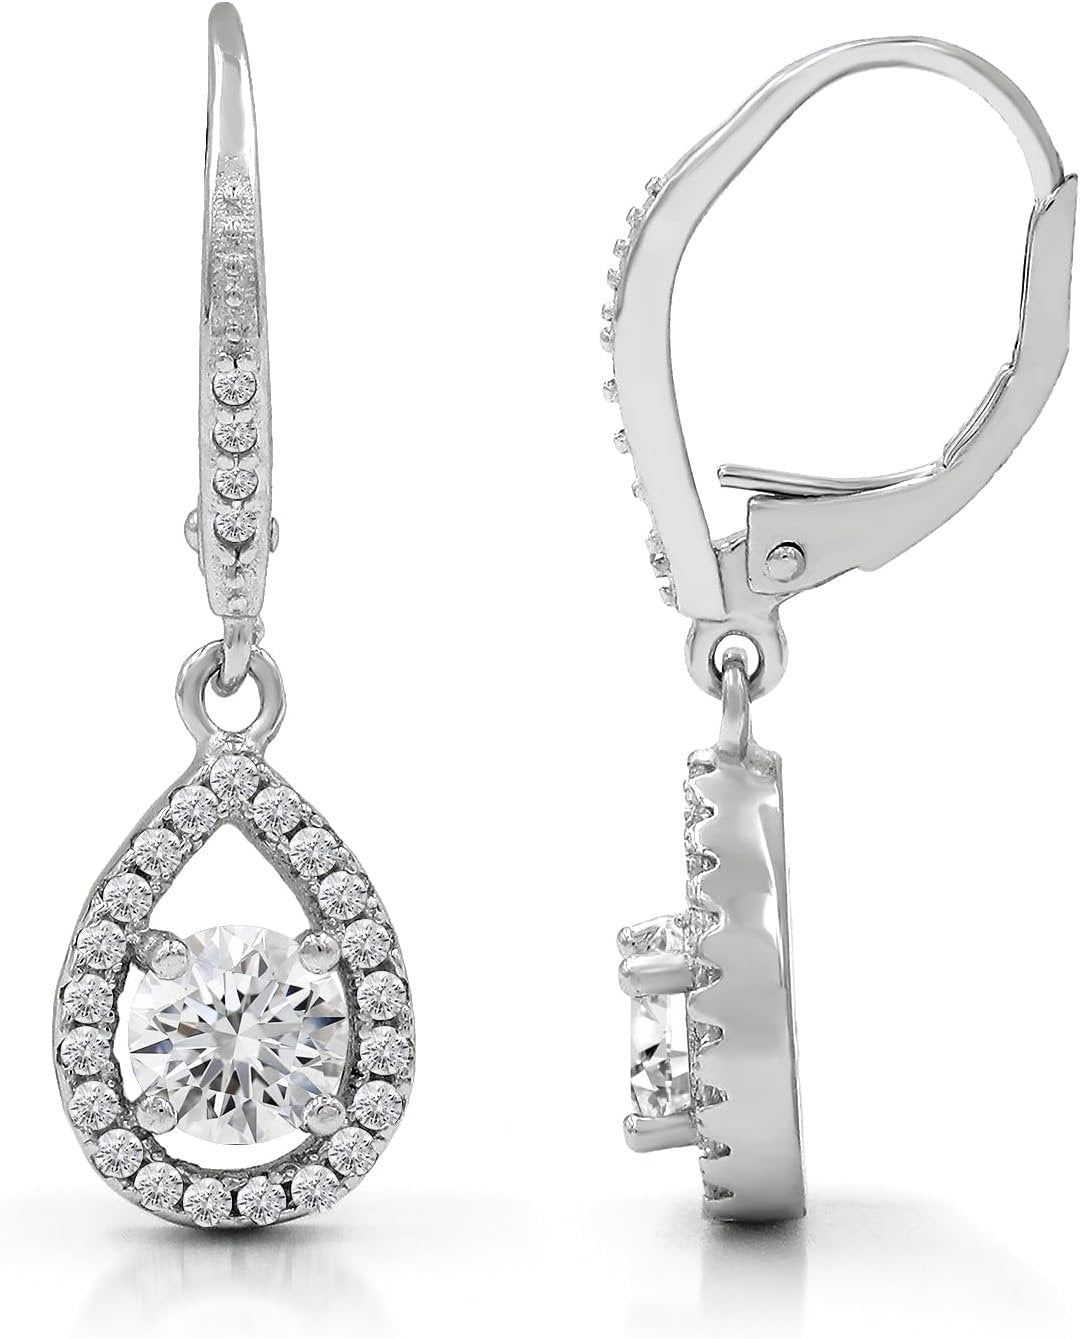 925 Sterling Silver Micro Pave Tear Drop LeverBack Earring